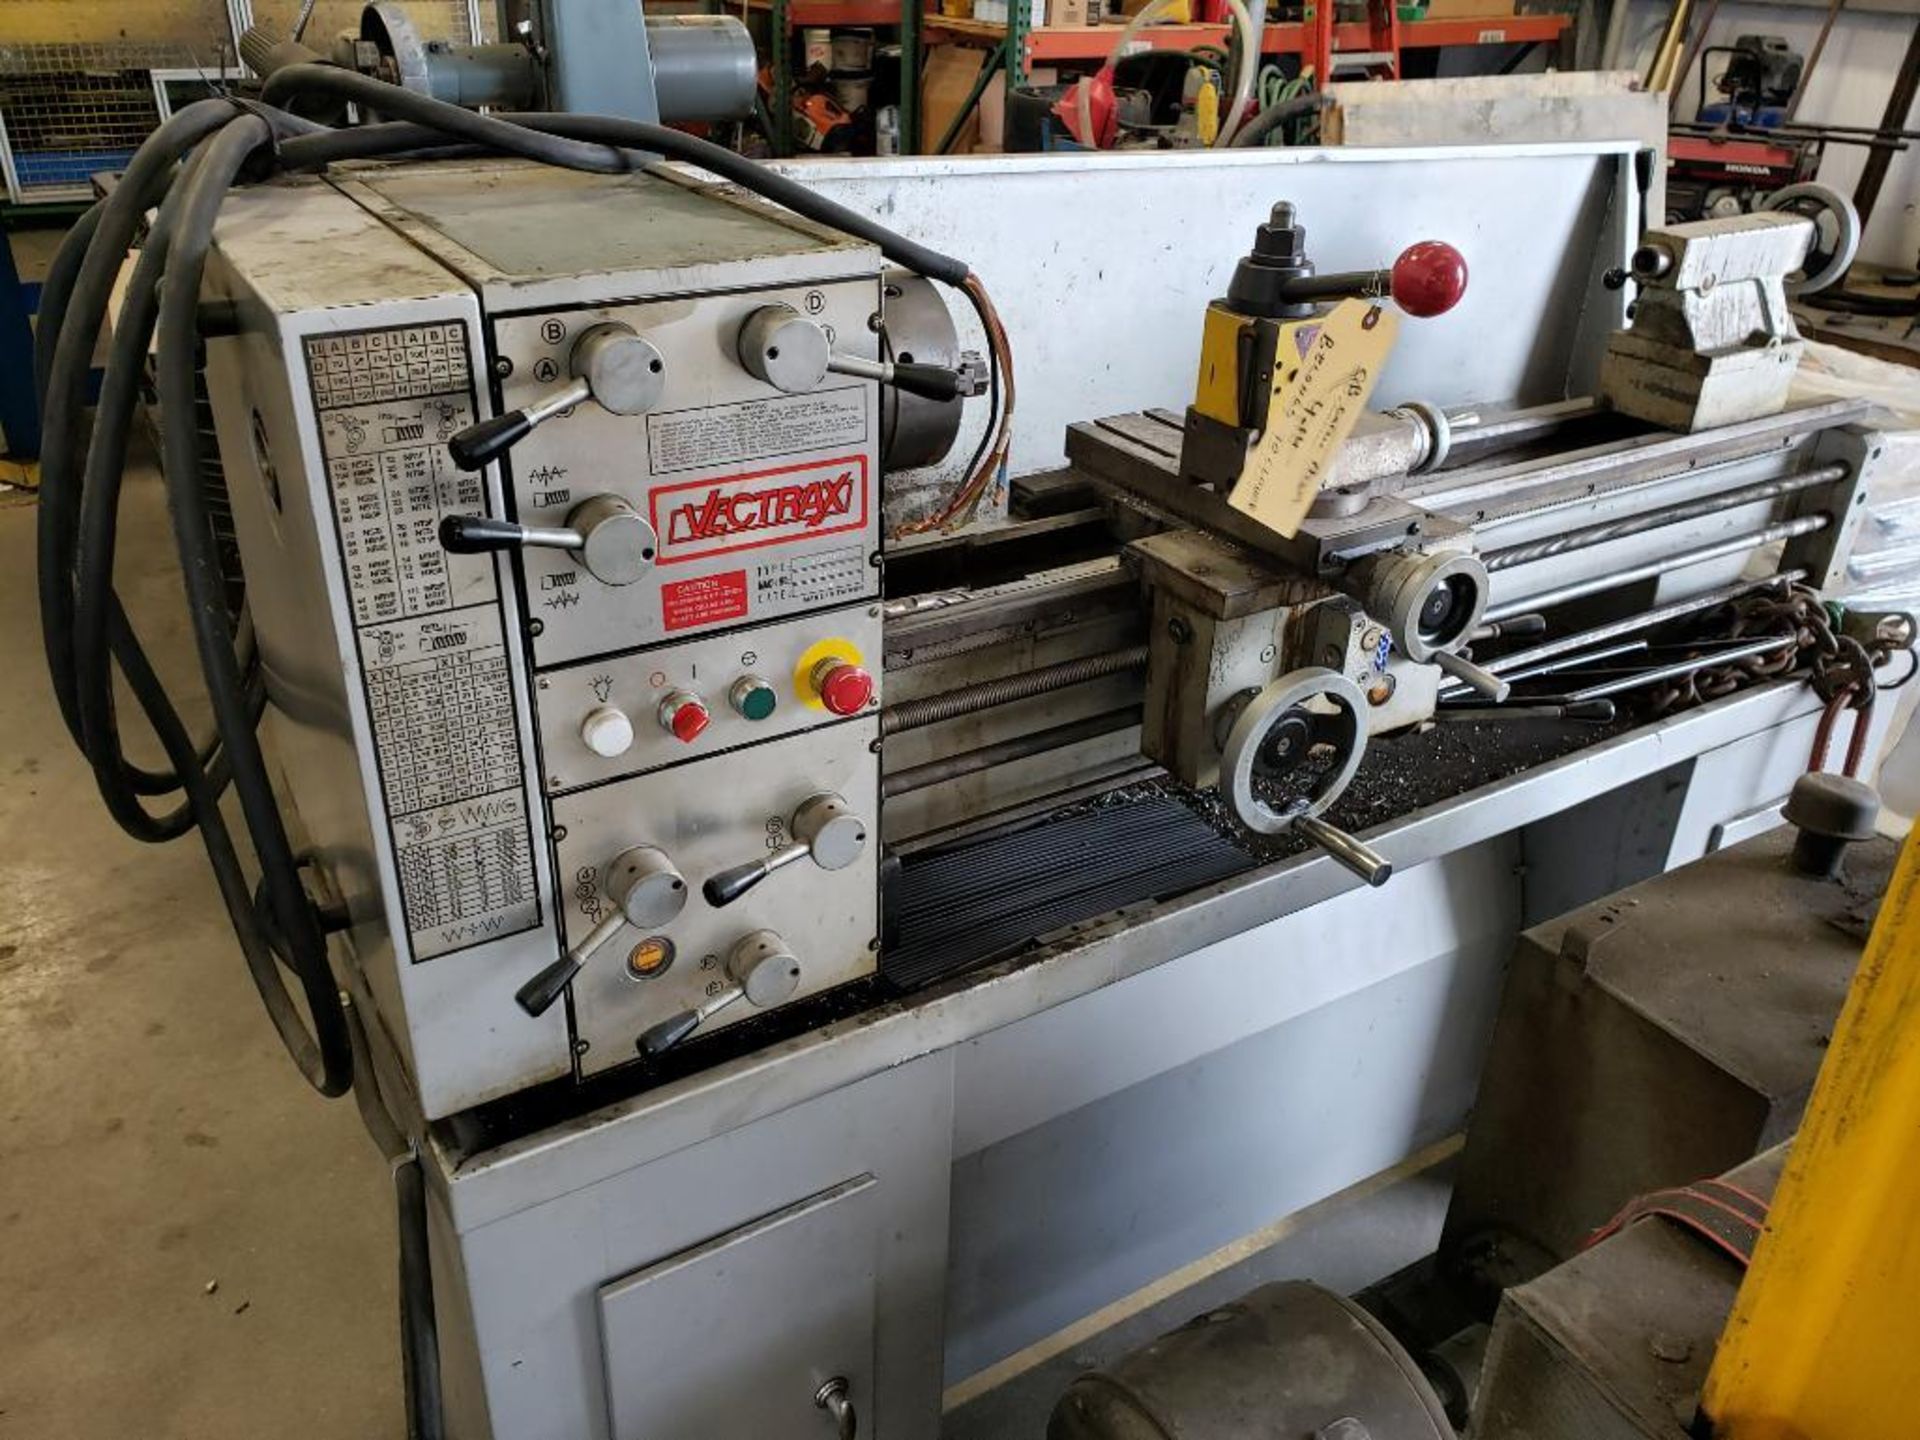 Vectrax lathe. Model CT1440 and 82837915. Mfg date 11/08